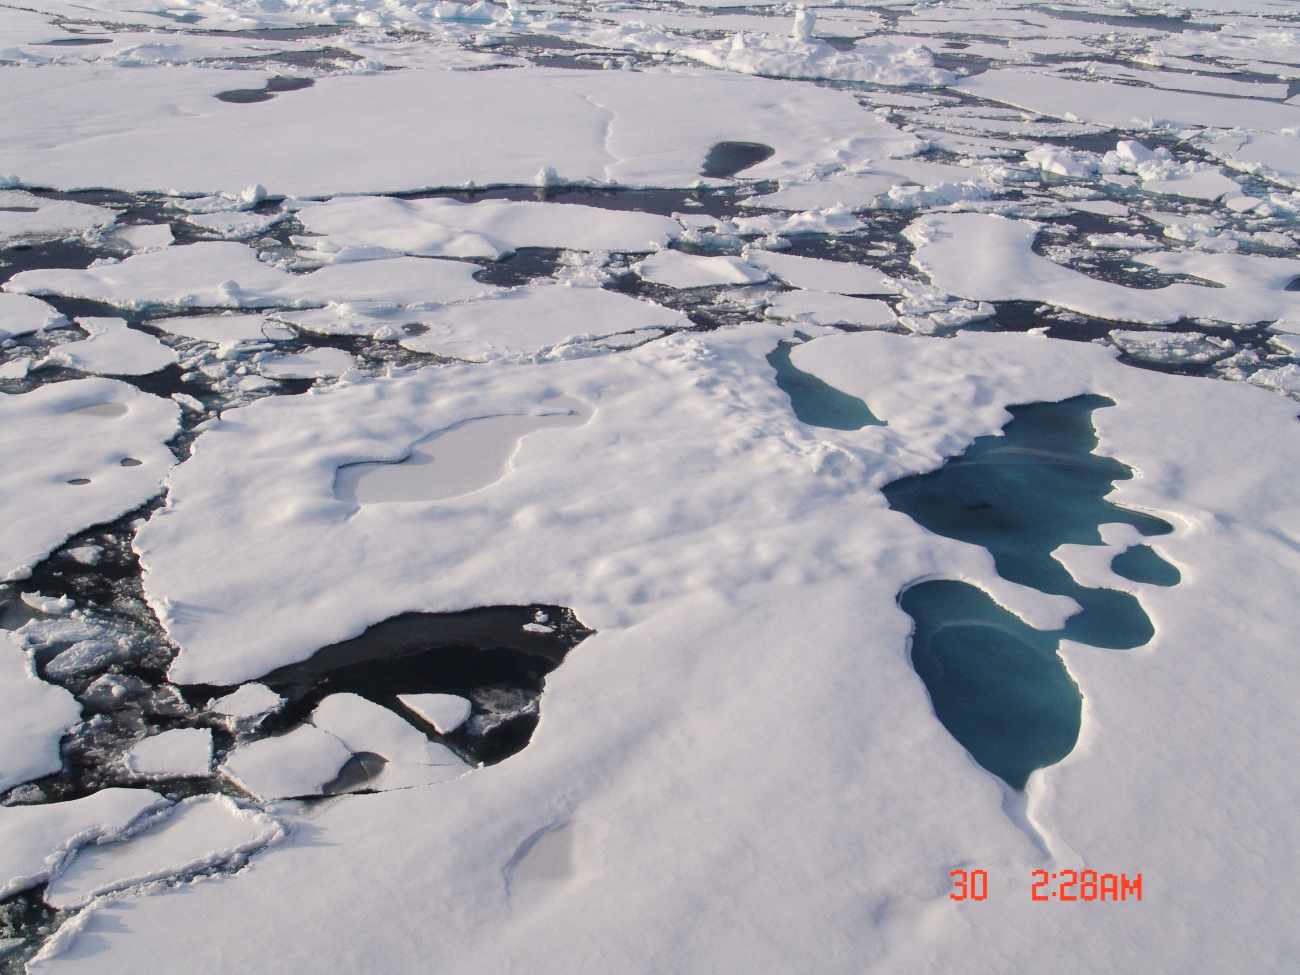 Multi-year ice floes and first year ice floes coming together at end of Arcticsummer